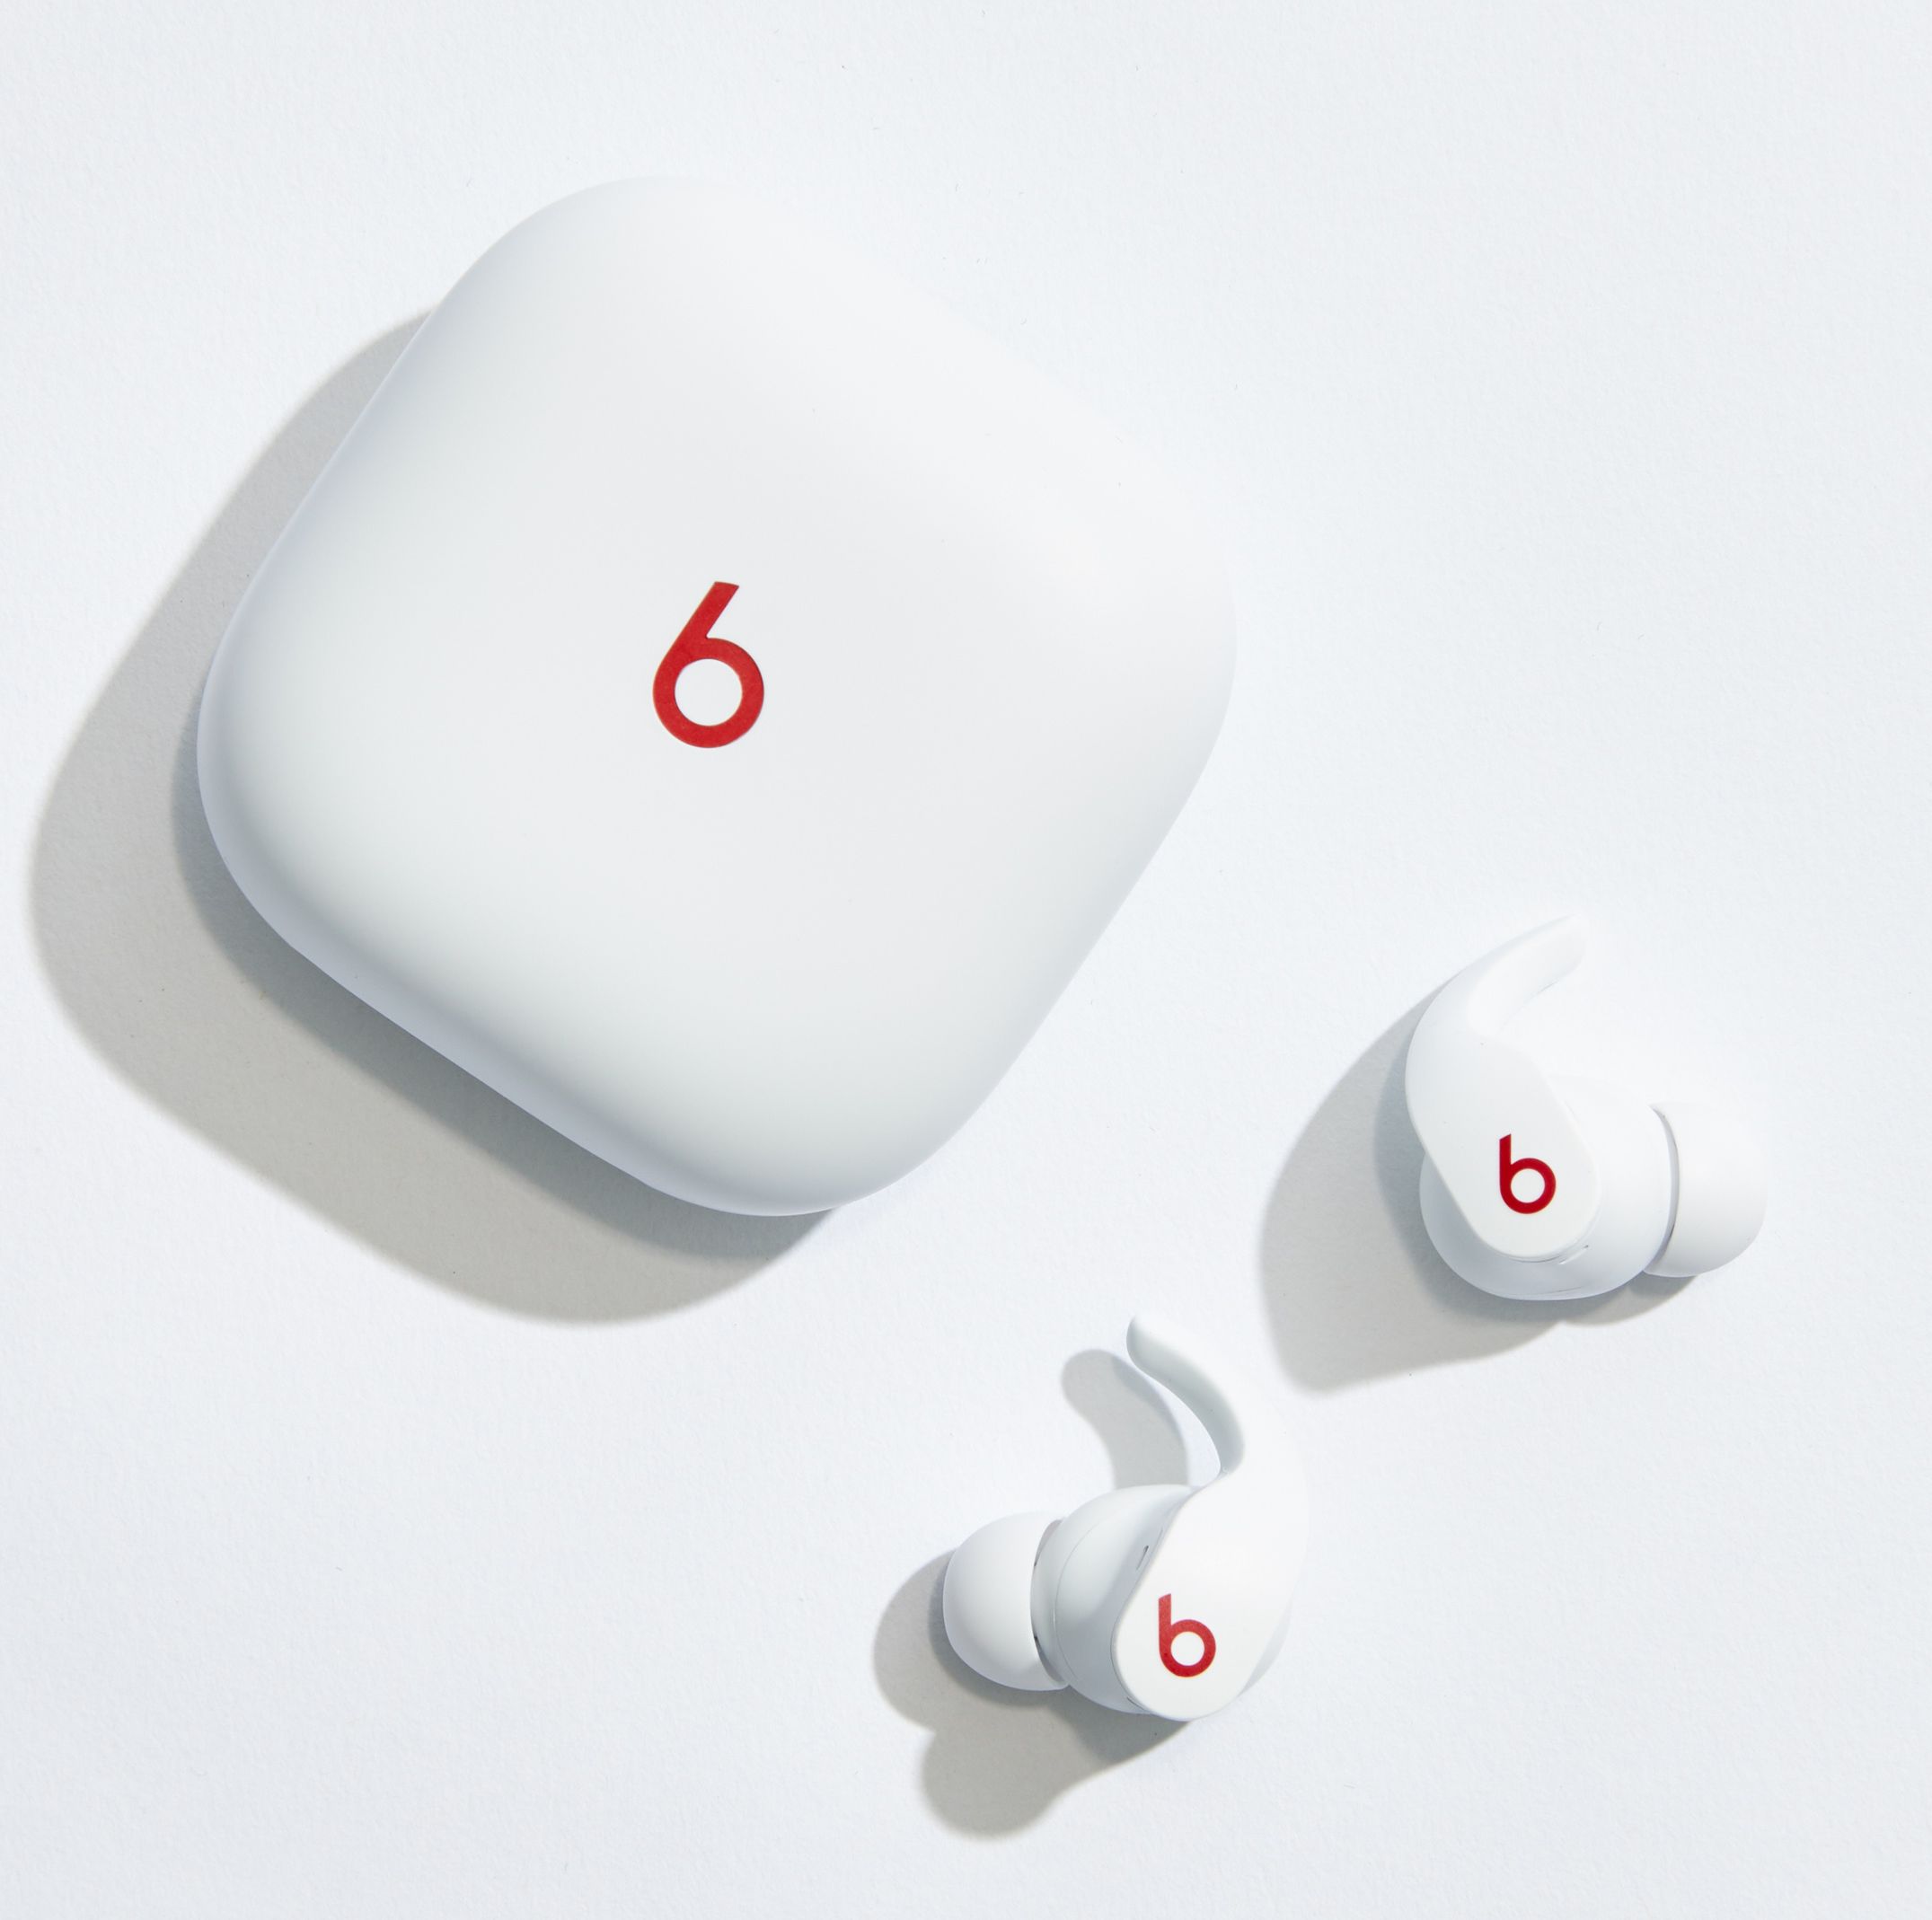 Beats Fit Pro Have Everything You Can Ask for In Earbuds